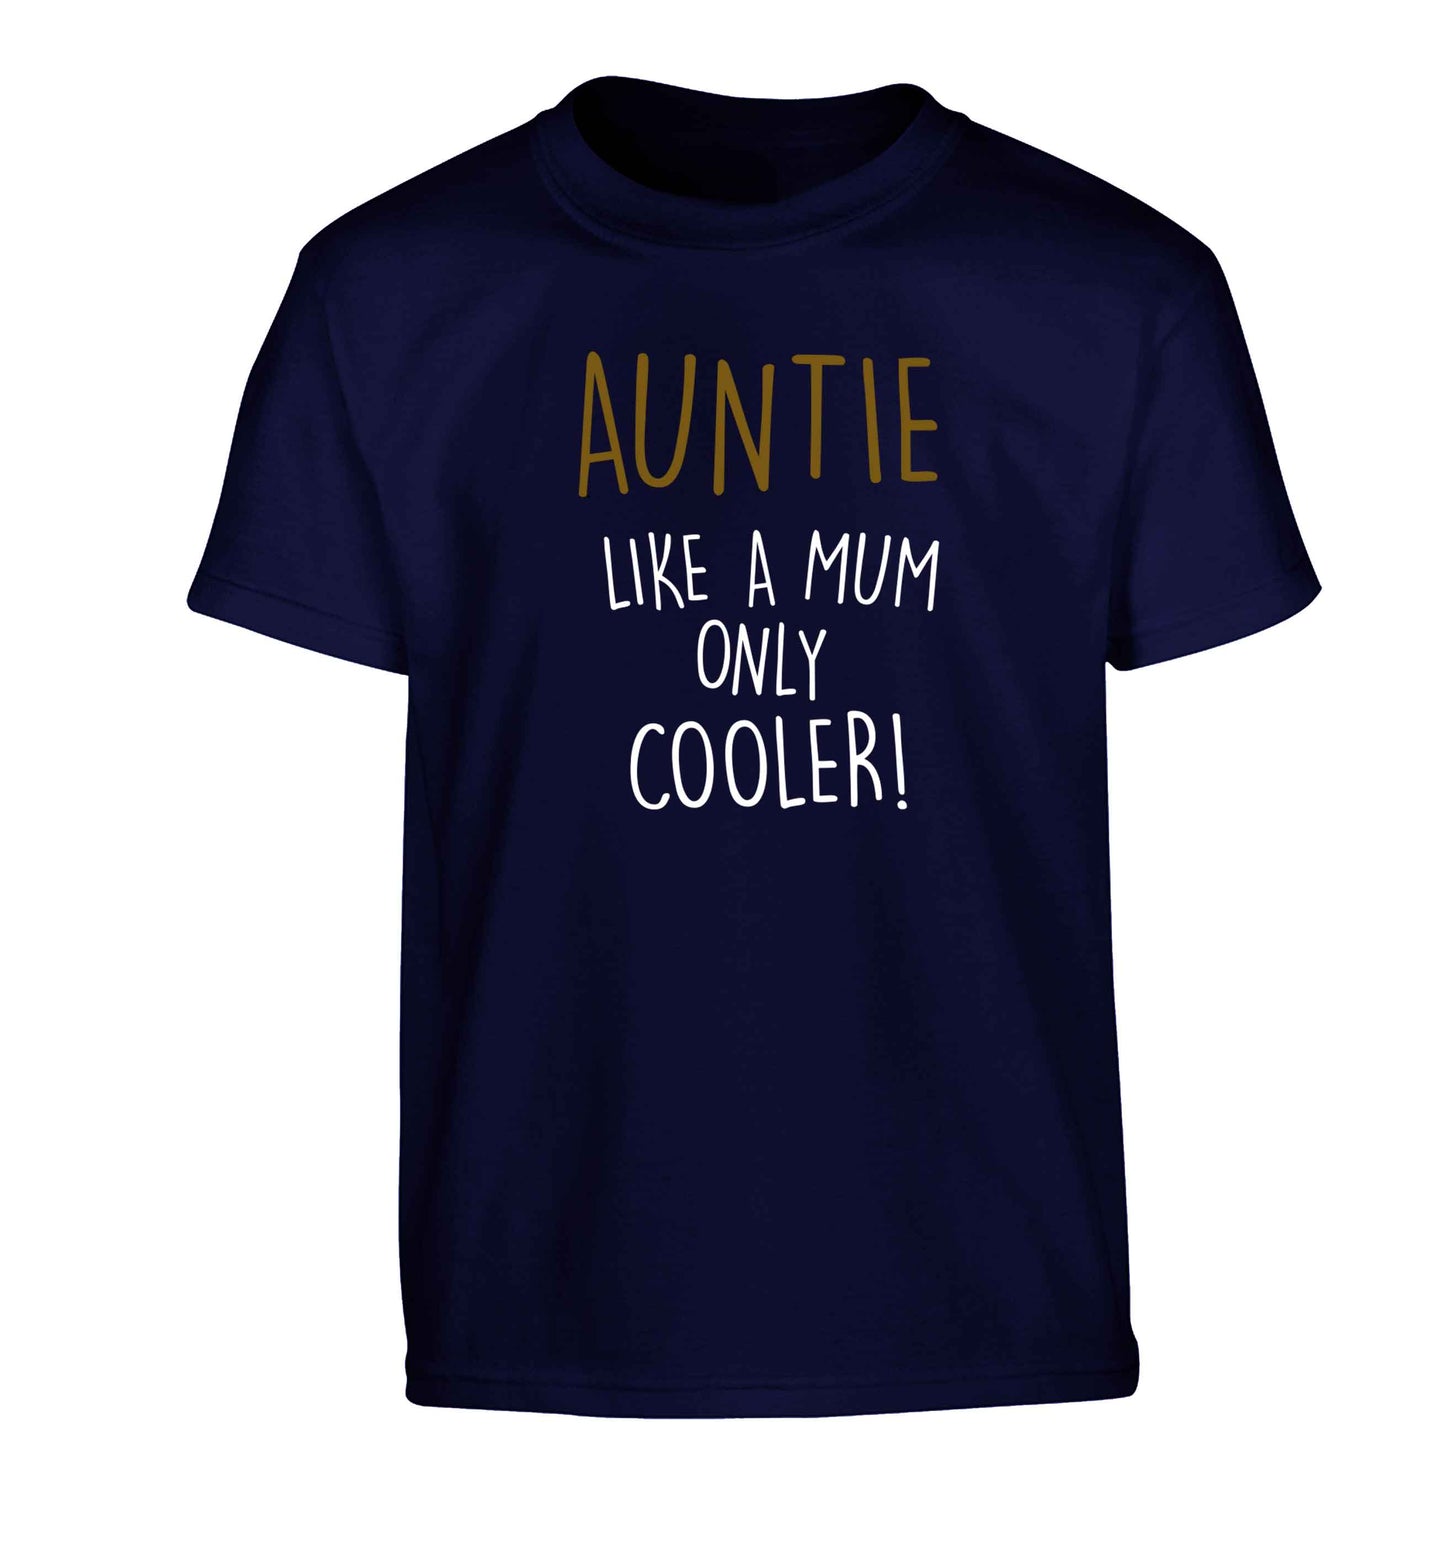 Auntie like a mum only cooler Children's navy Tshirt 12-13 Years